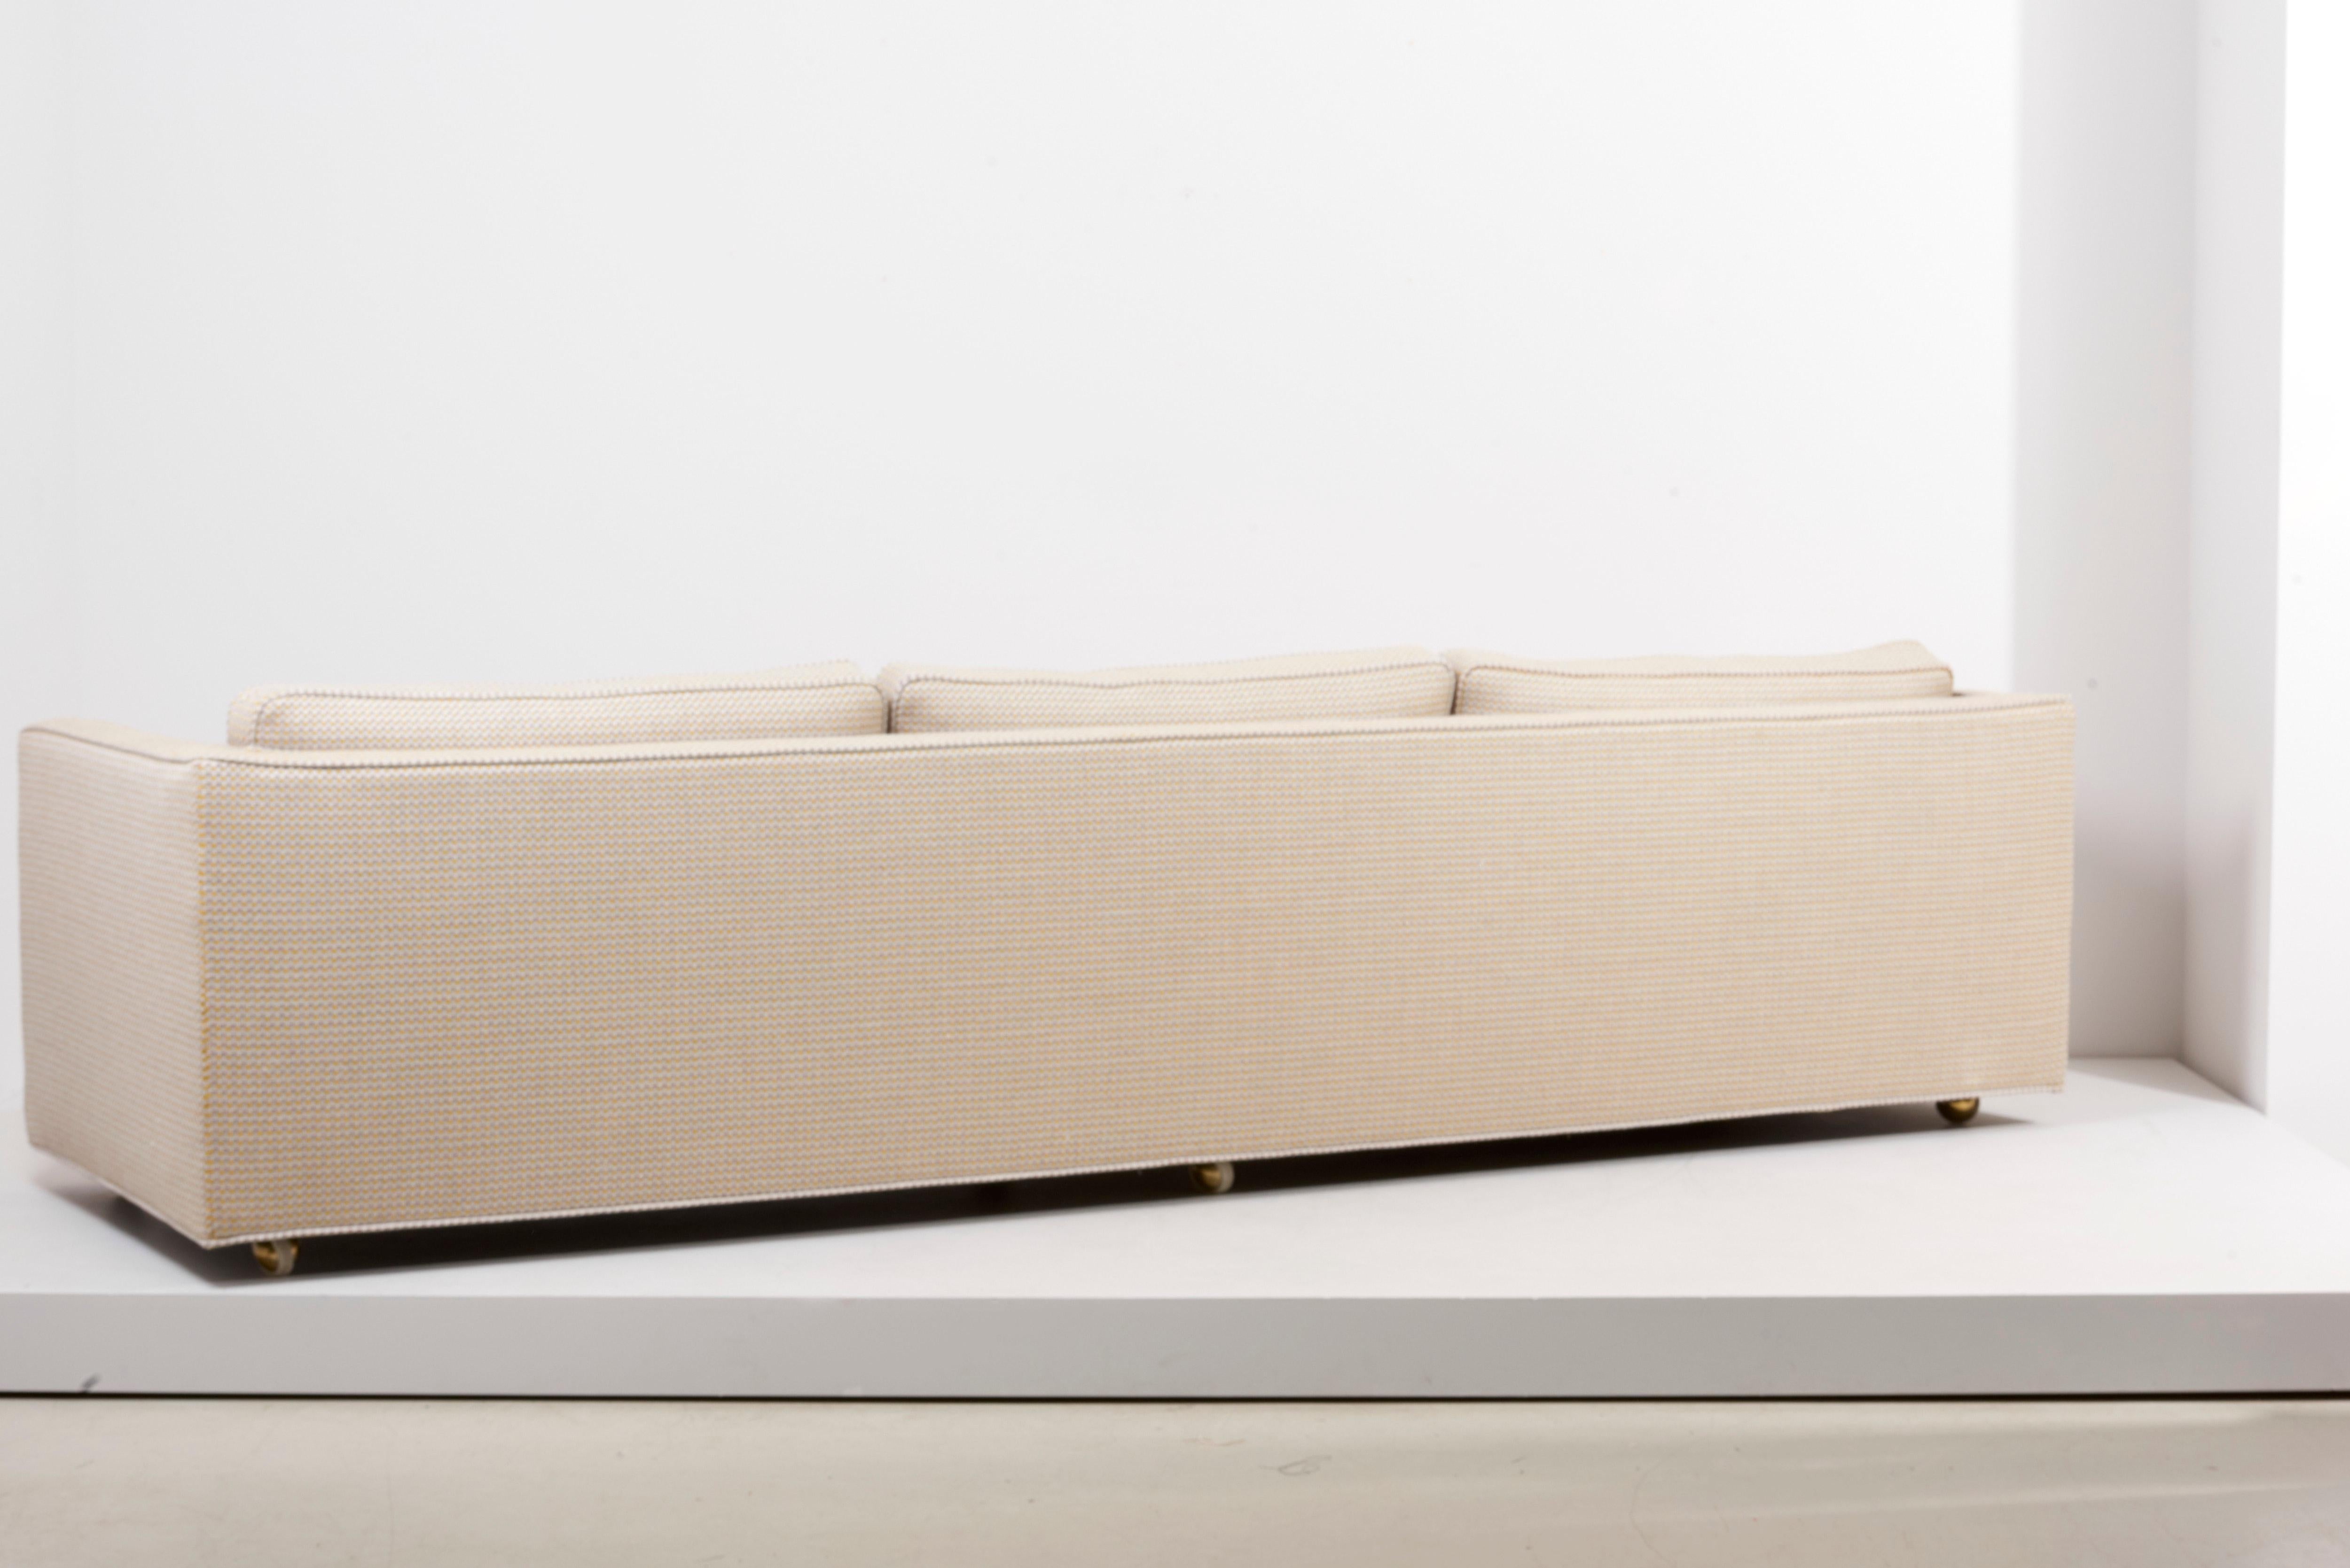 Mid-20th Century Restored Edward Wormley Tuxedo Sofa for Dunbar in yellow beige fabric, USA 1960s For Sale